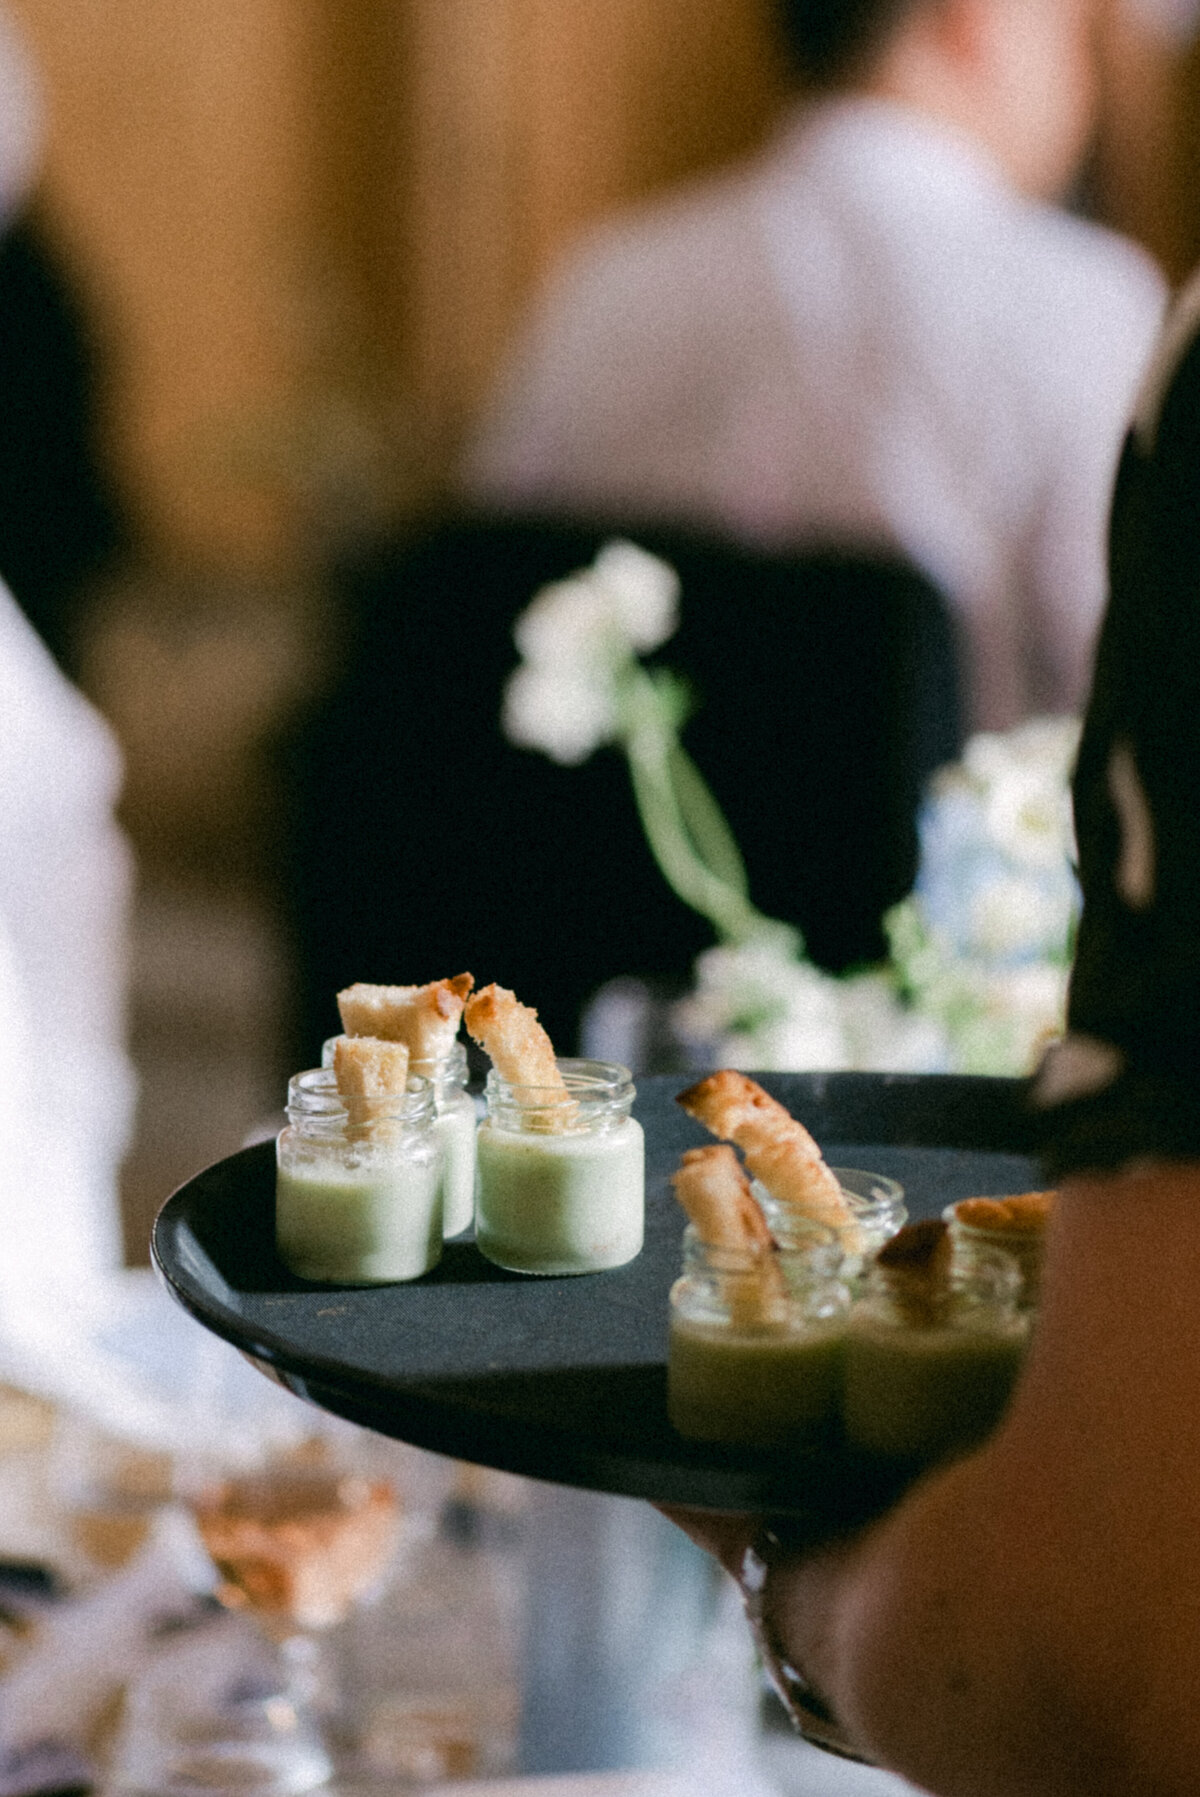 A waiter serving wedding dinner in an image photographed by wedding photographer Hannika Gabrielsson.